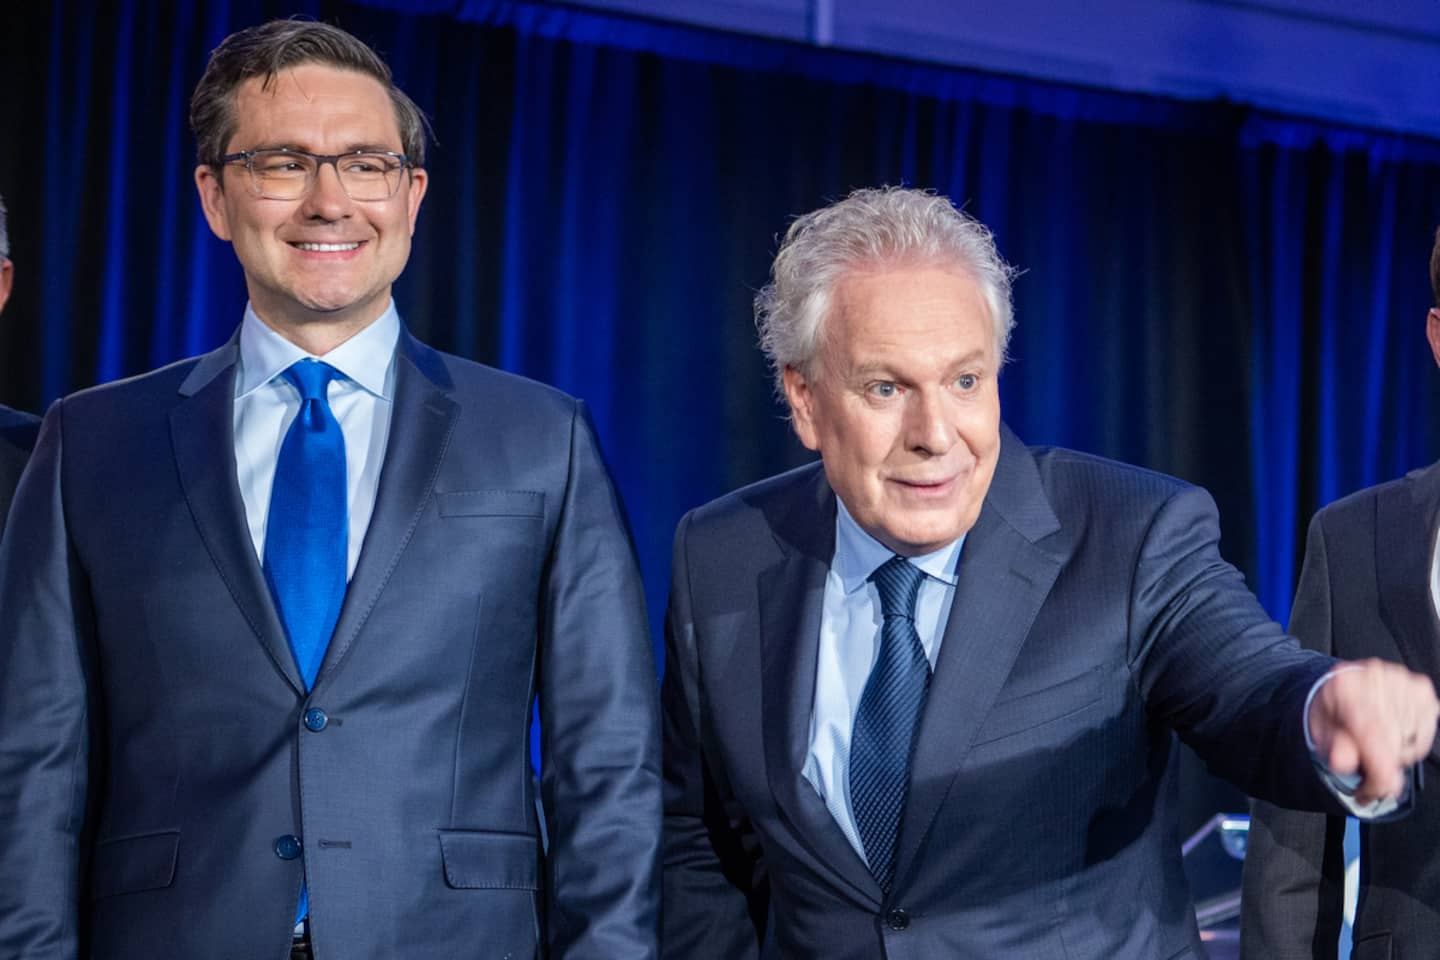 Poilievre vs. Charest: Another poll confirms the two different voices